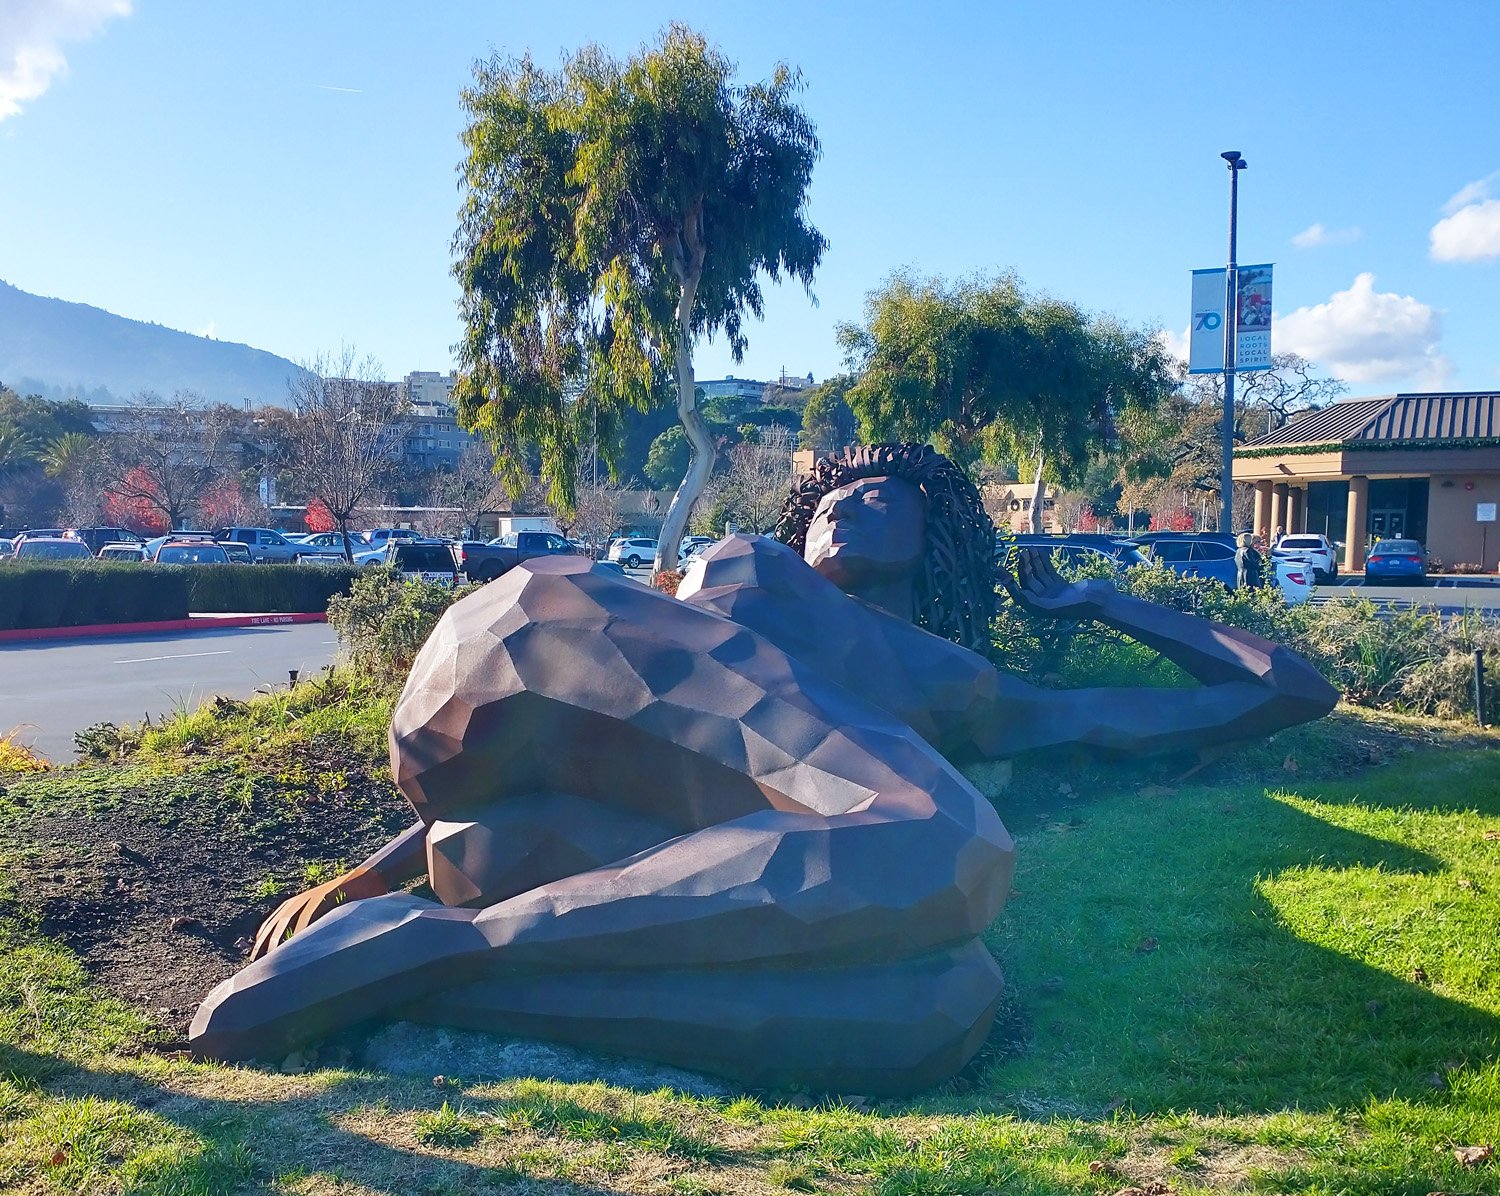 The point of this ride, this giant woman statue in Greenbrae.